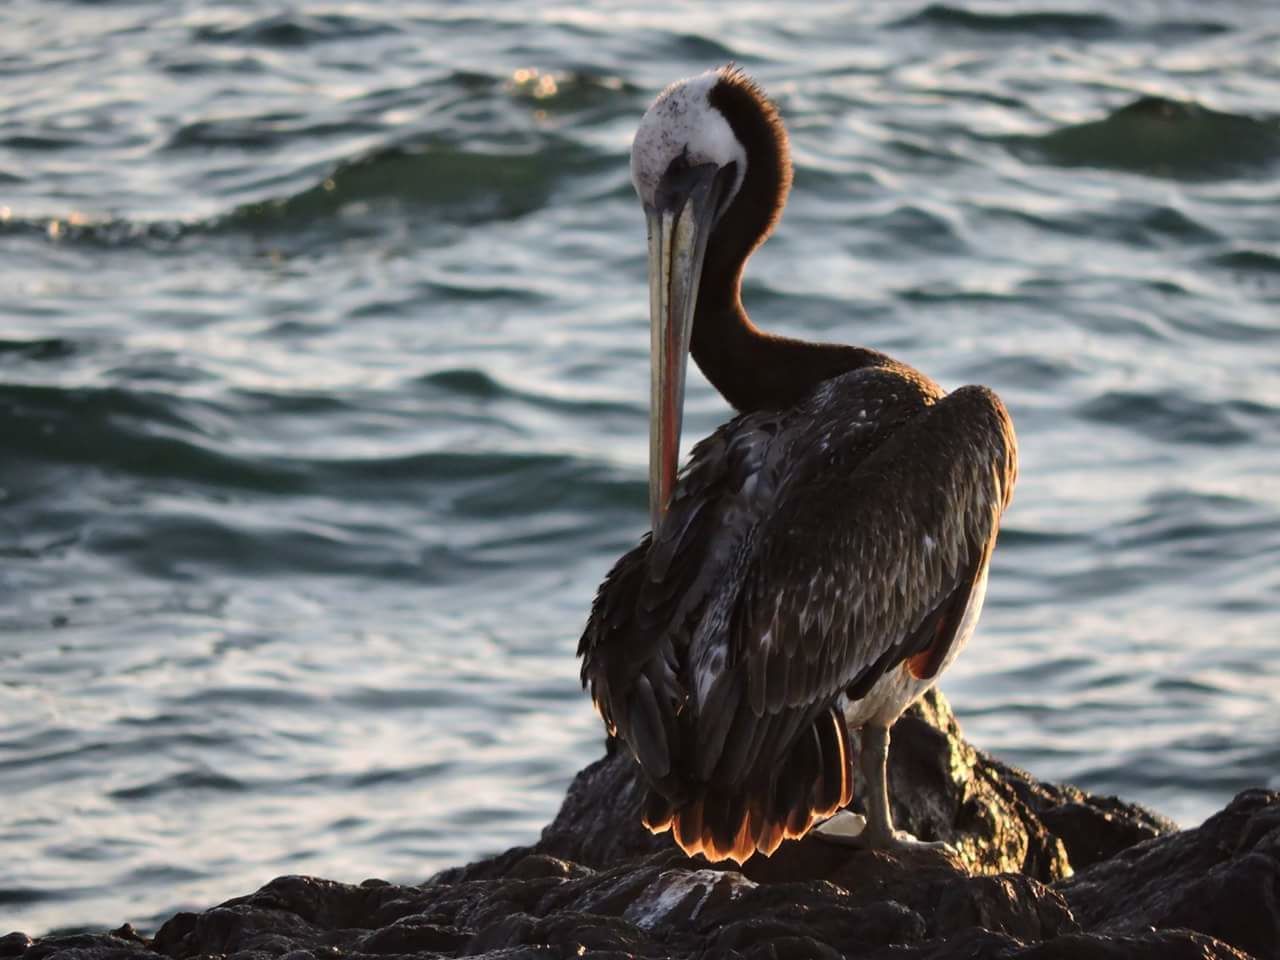 CLOSE-UP OF PELICAN ON SHORE